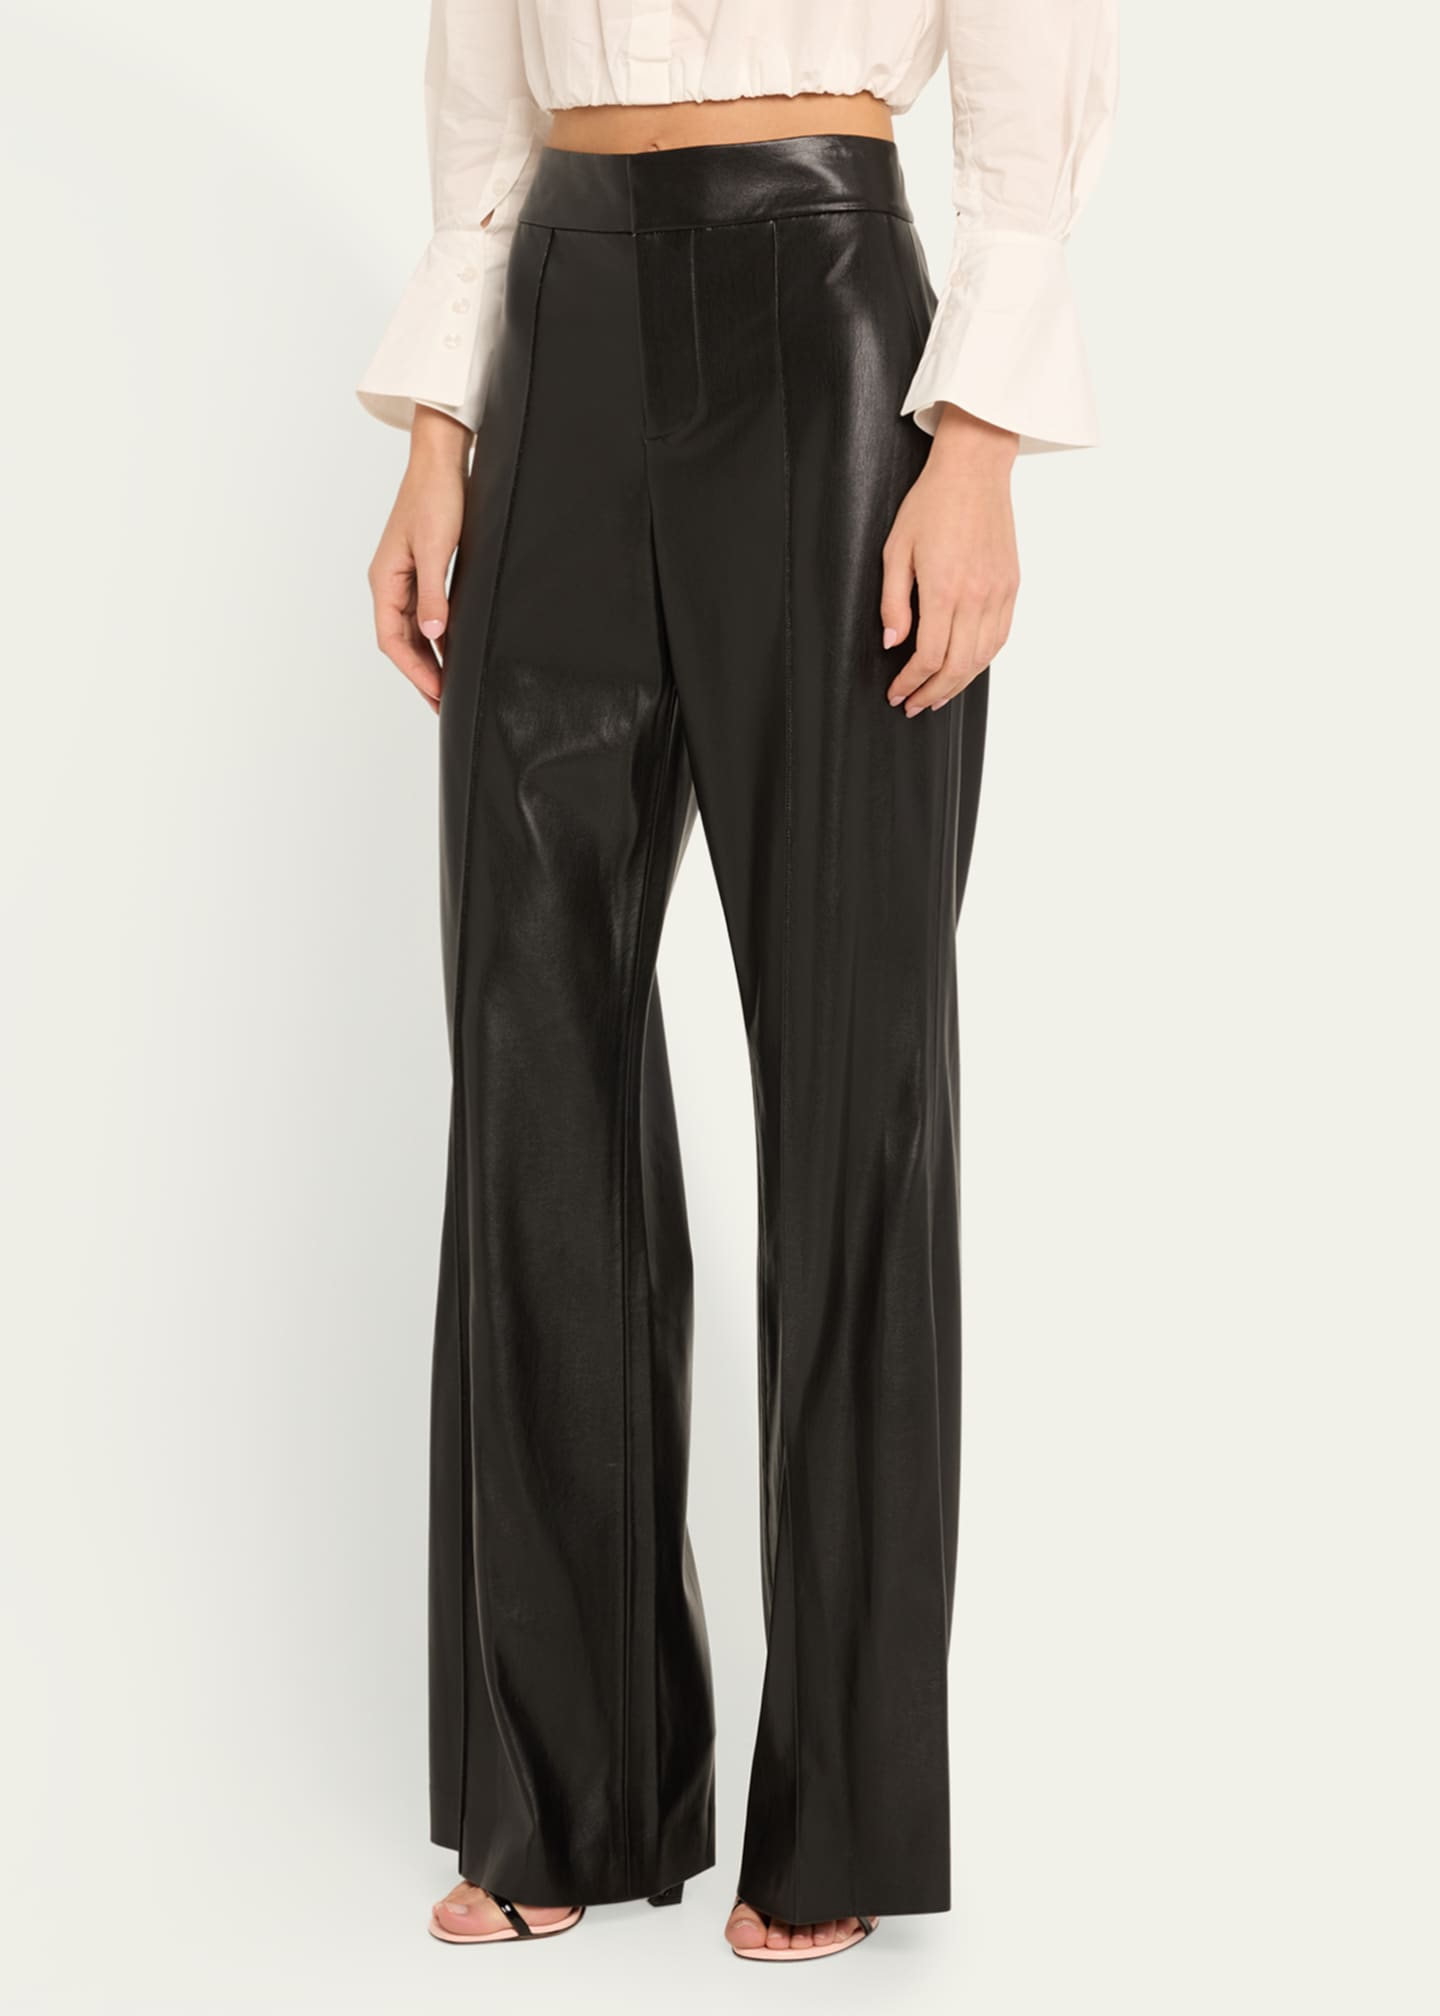 Alice + Olivia Dylan High-Waist Faux-Leather Pants - Bergdorf Goodman